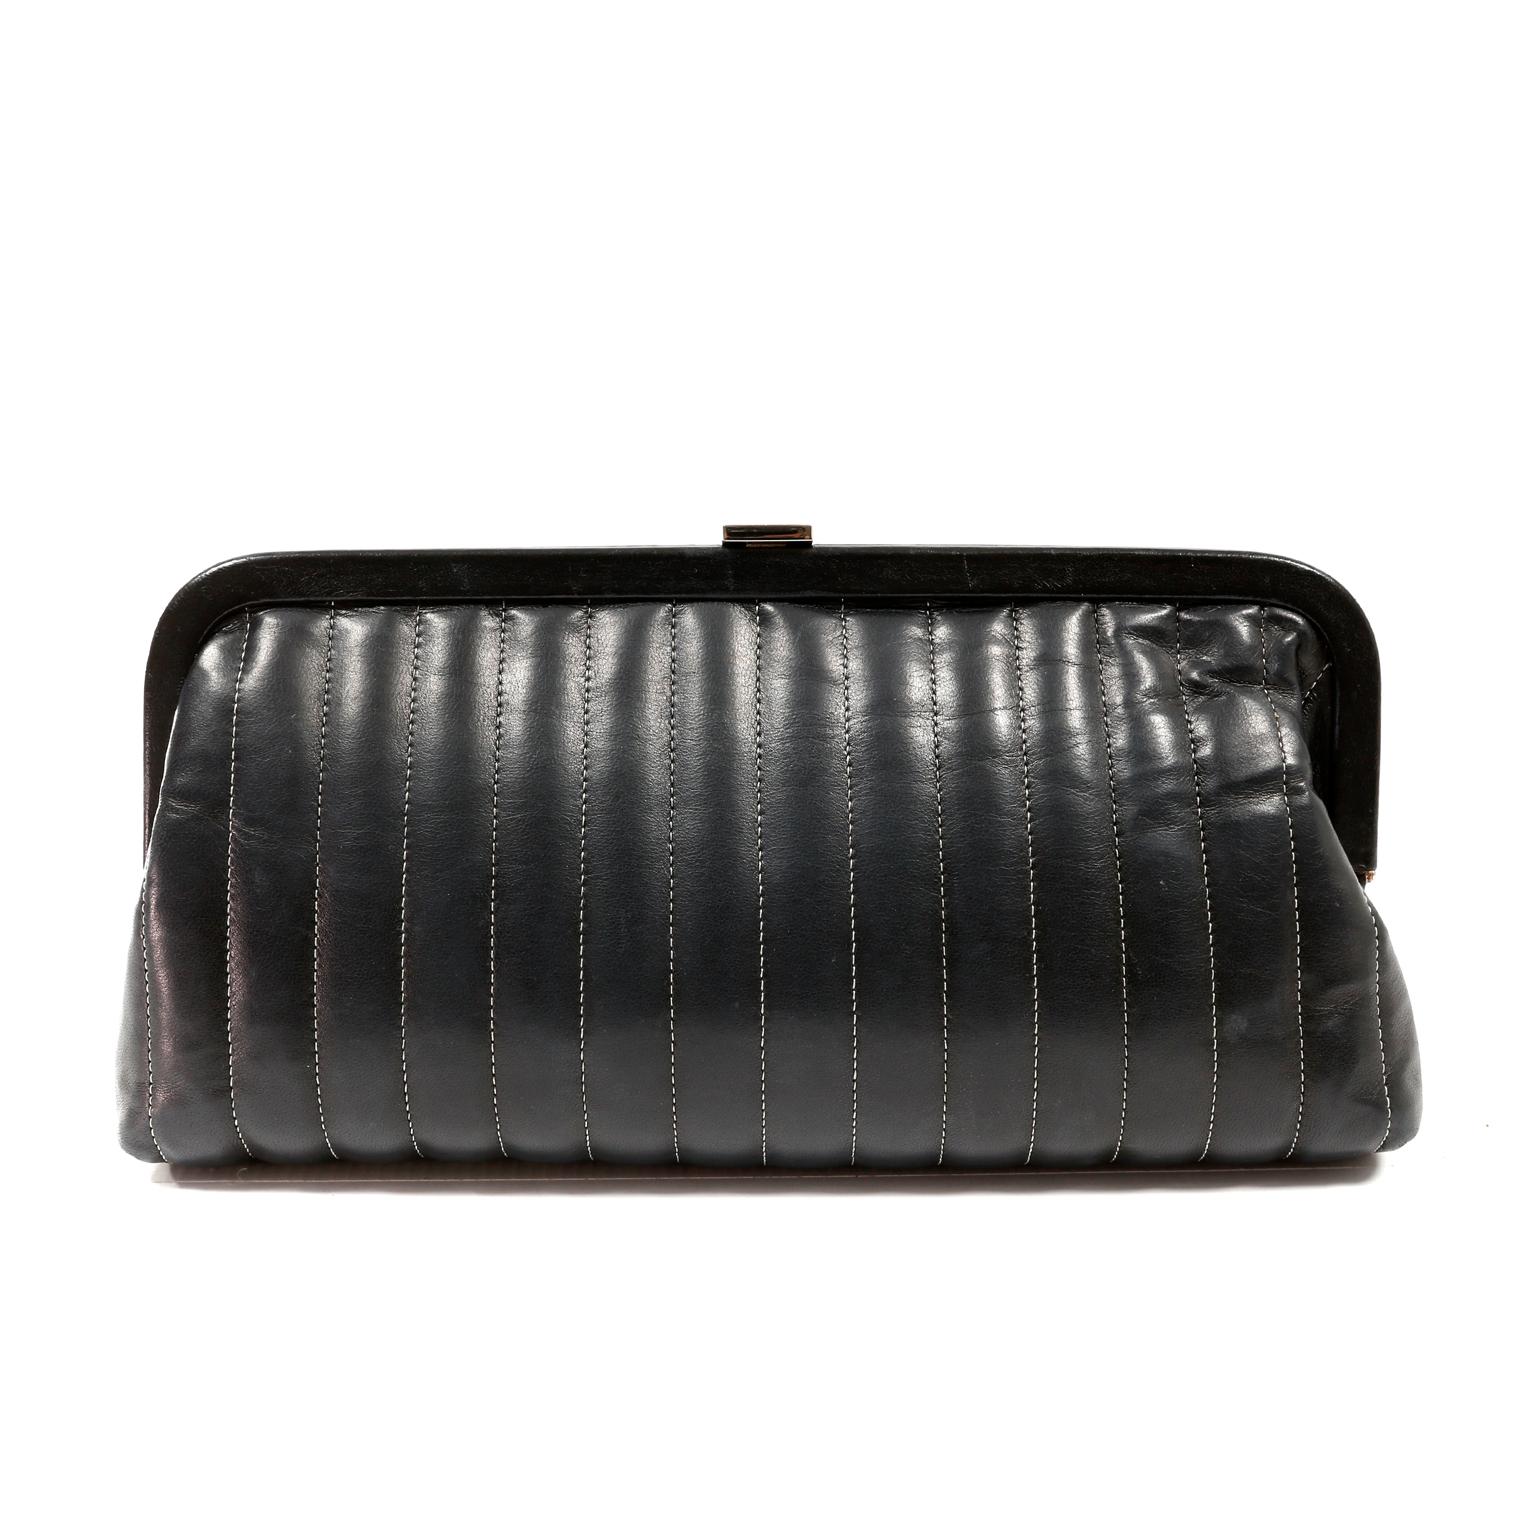 This authentic Chanel Black Lambskin Vertical Stitch Clutch is in good previously owned condition.  Elegant and timeless, this perfectly sized clutch is a great investment piece for a classic wardrobe.  
Soft black lambskin framed clutch is